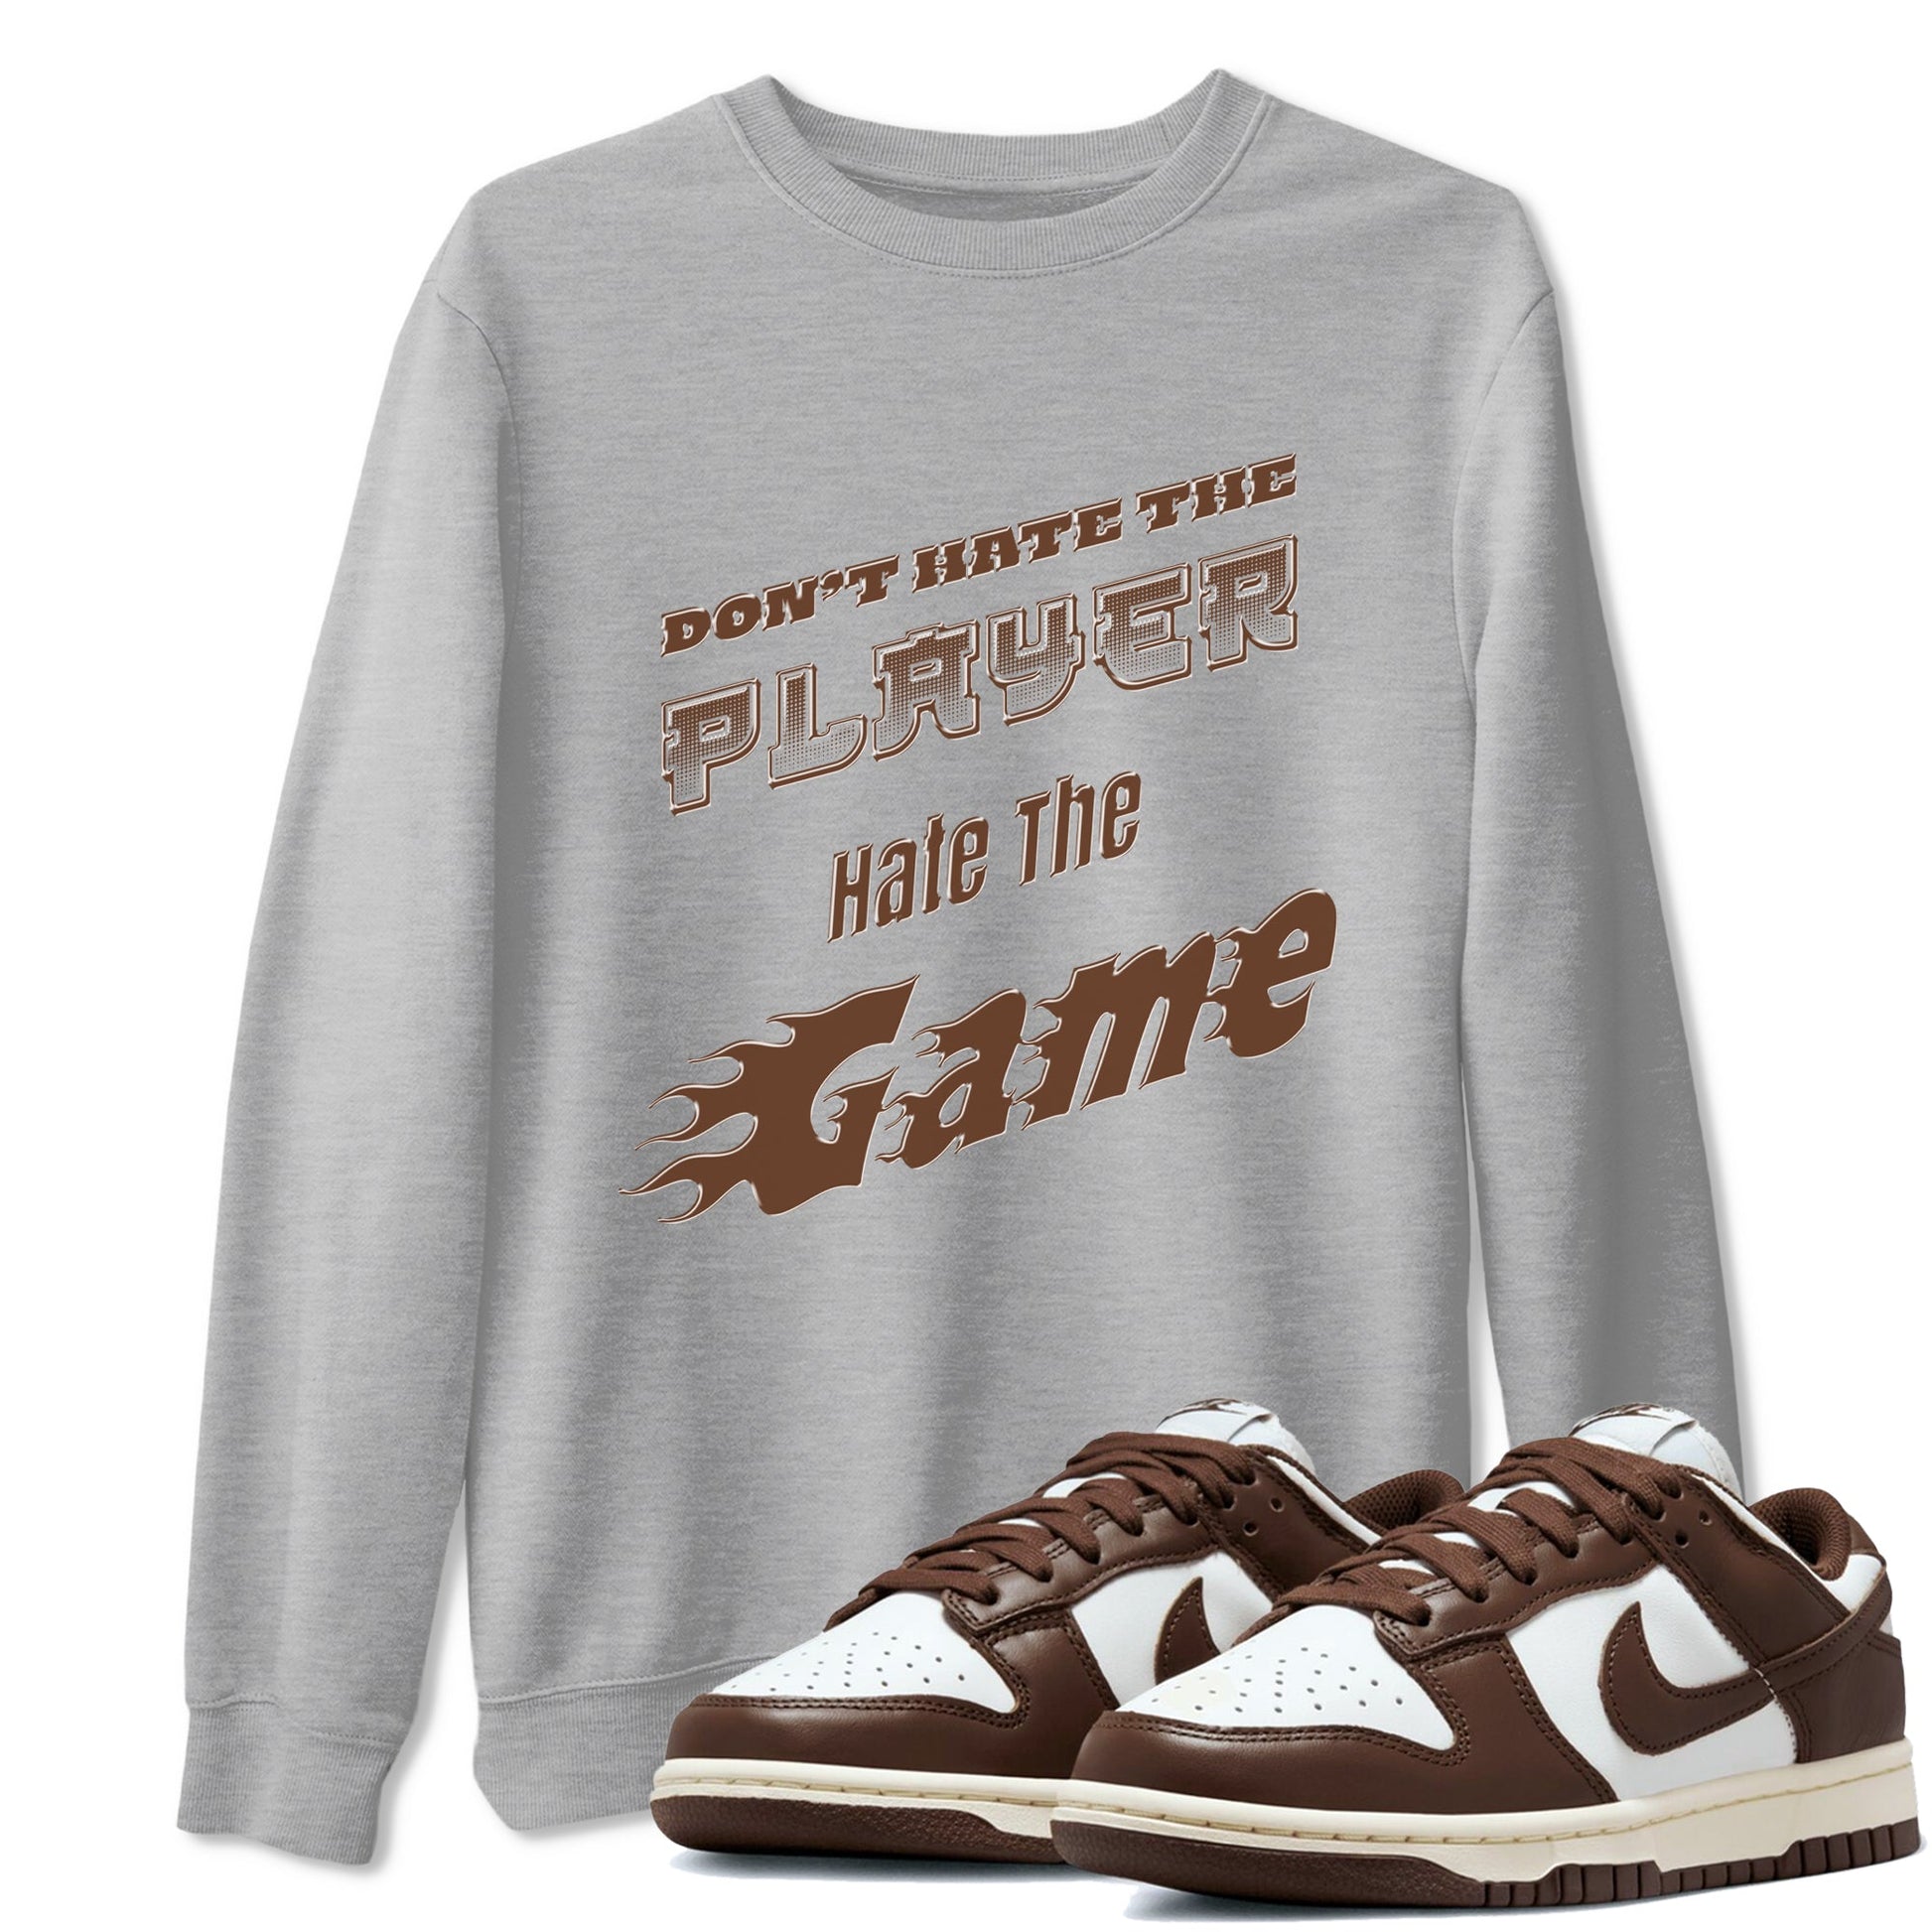 Dunk Cacao Wow shirt to match jordans Don't Hate The Player sneaker tees Dunk Cacao Wow SNRT Sneaker Release Tees Unisex Heather Grey 1 T-Shirt